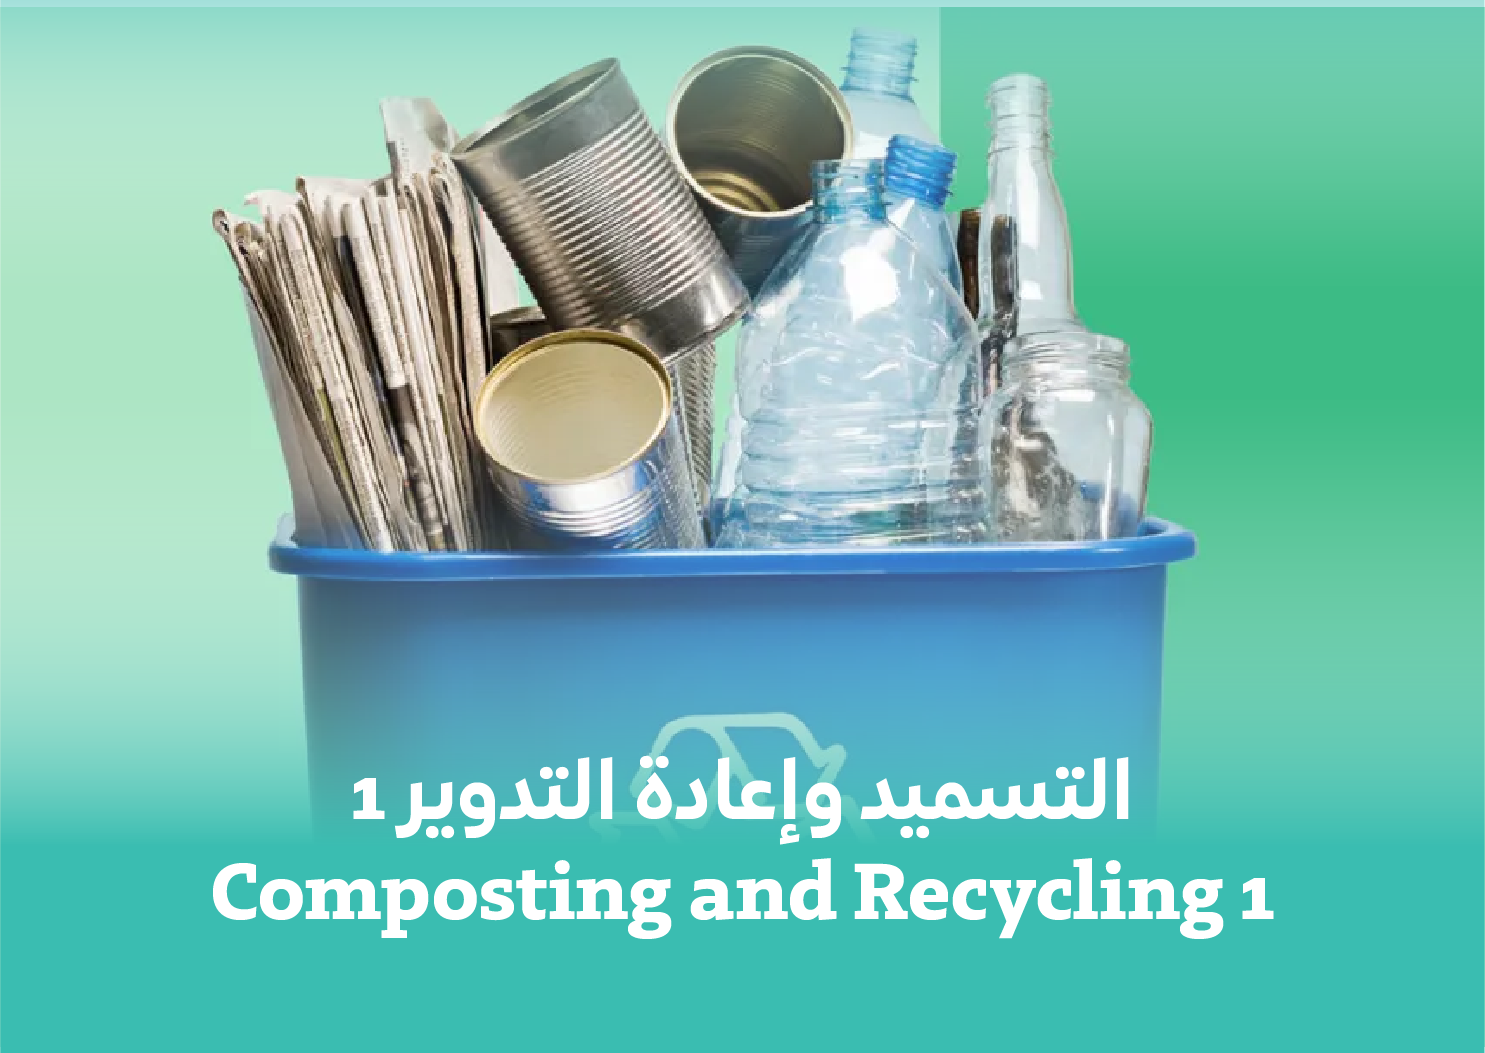 Composting and Recycling 1